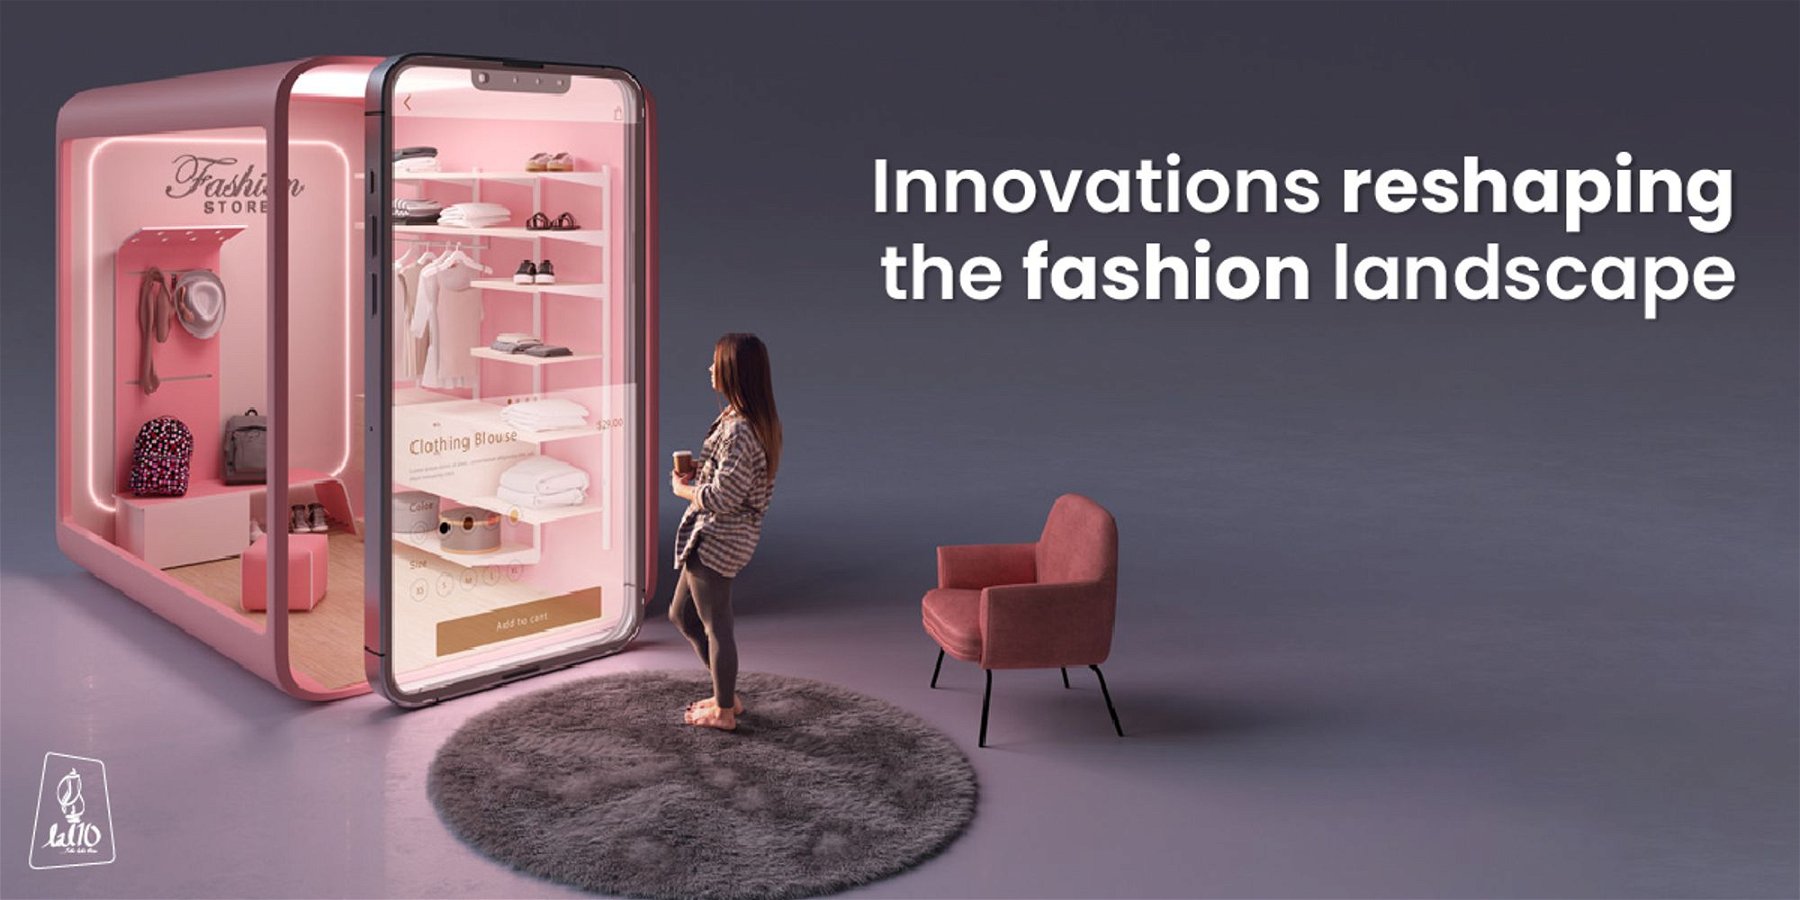 Innovations reshaping the fashion landscape